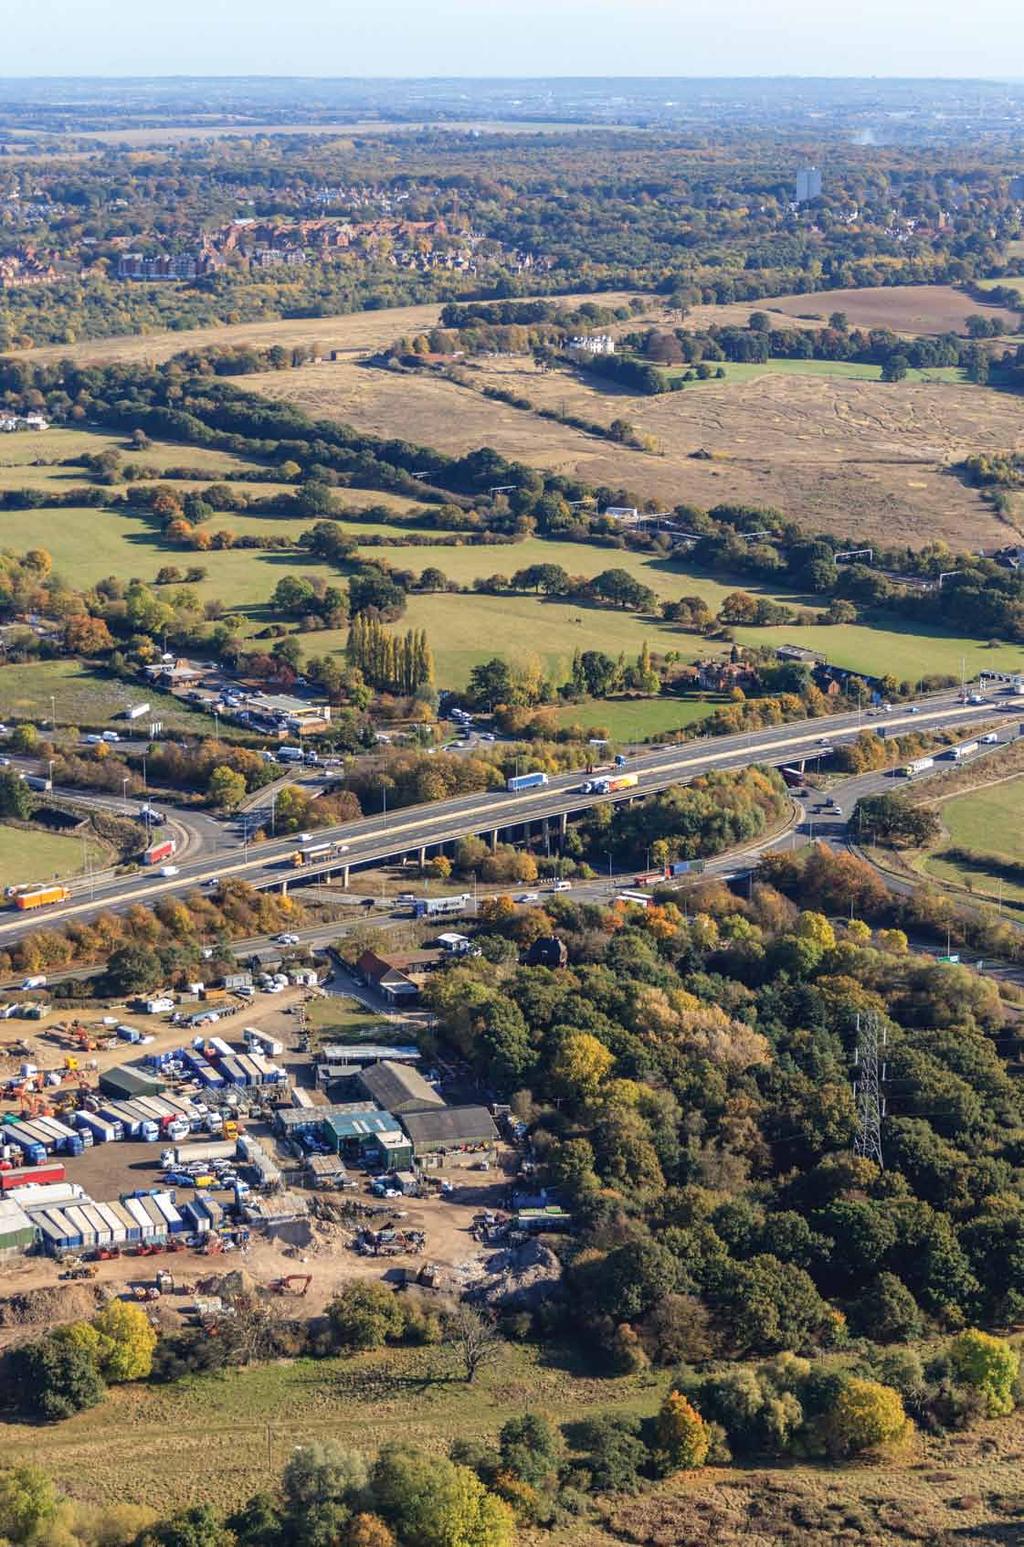 M25 junction 28 improvement scheme Statutory consultation This statutory consultation about the M25 junction 28 improvement scheme will run for eight weeks, from 3 December 2018 to 28 January 2019.